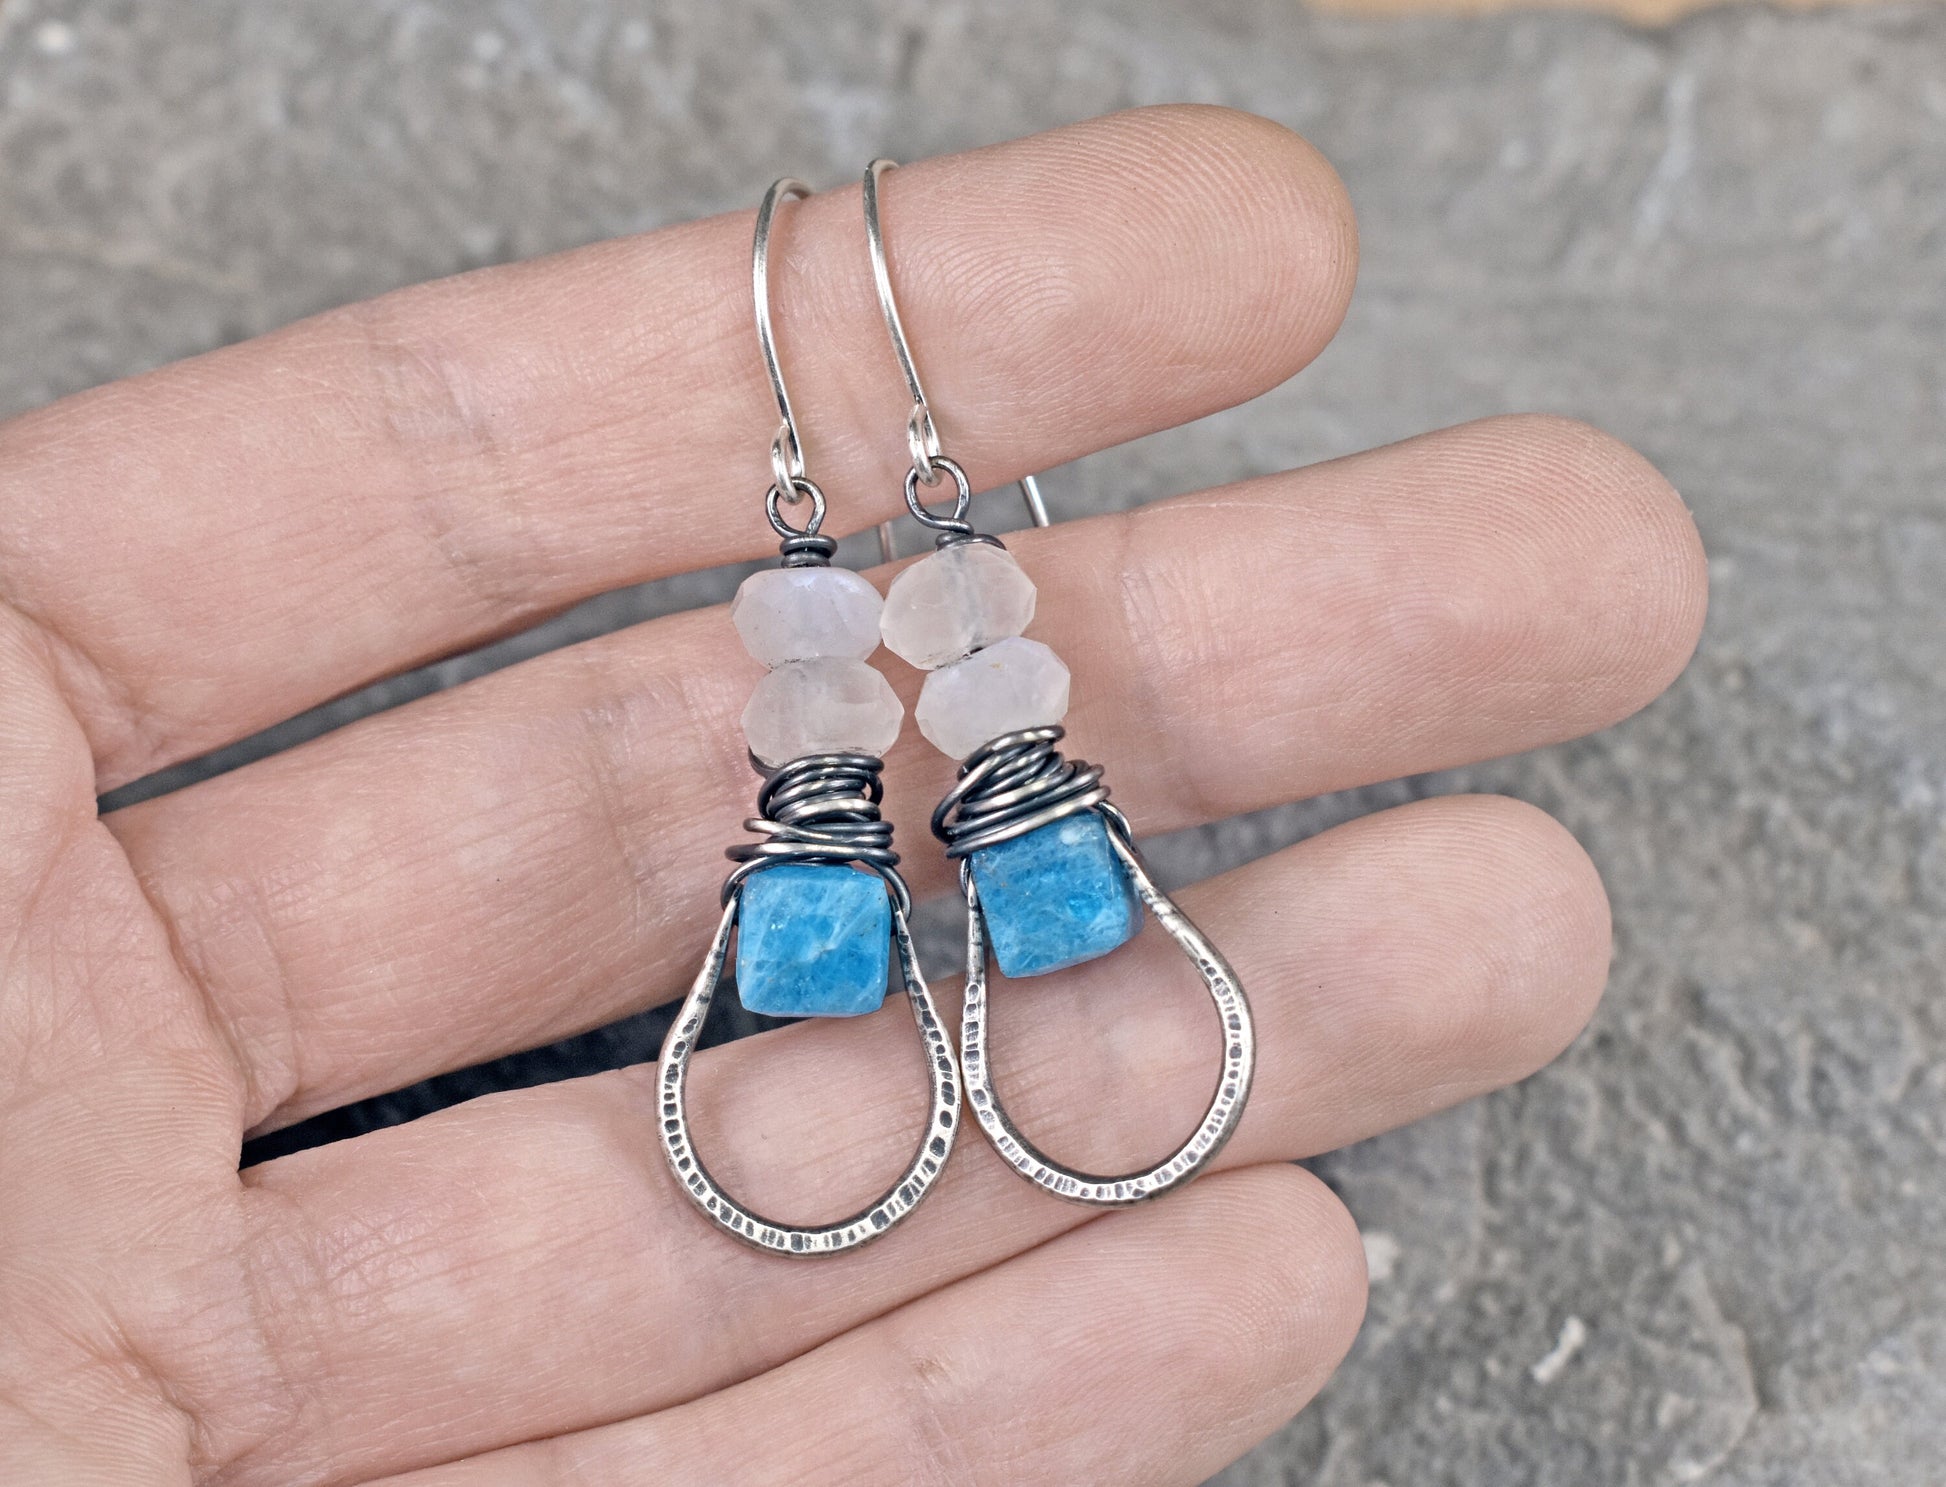 Blue Apatite Earrings, Rustic Moonstone Sterling Silver Dangles, Natural Stone Wire Wrap Jewelry, Artisan Unique Metalwork